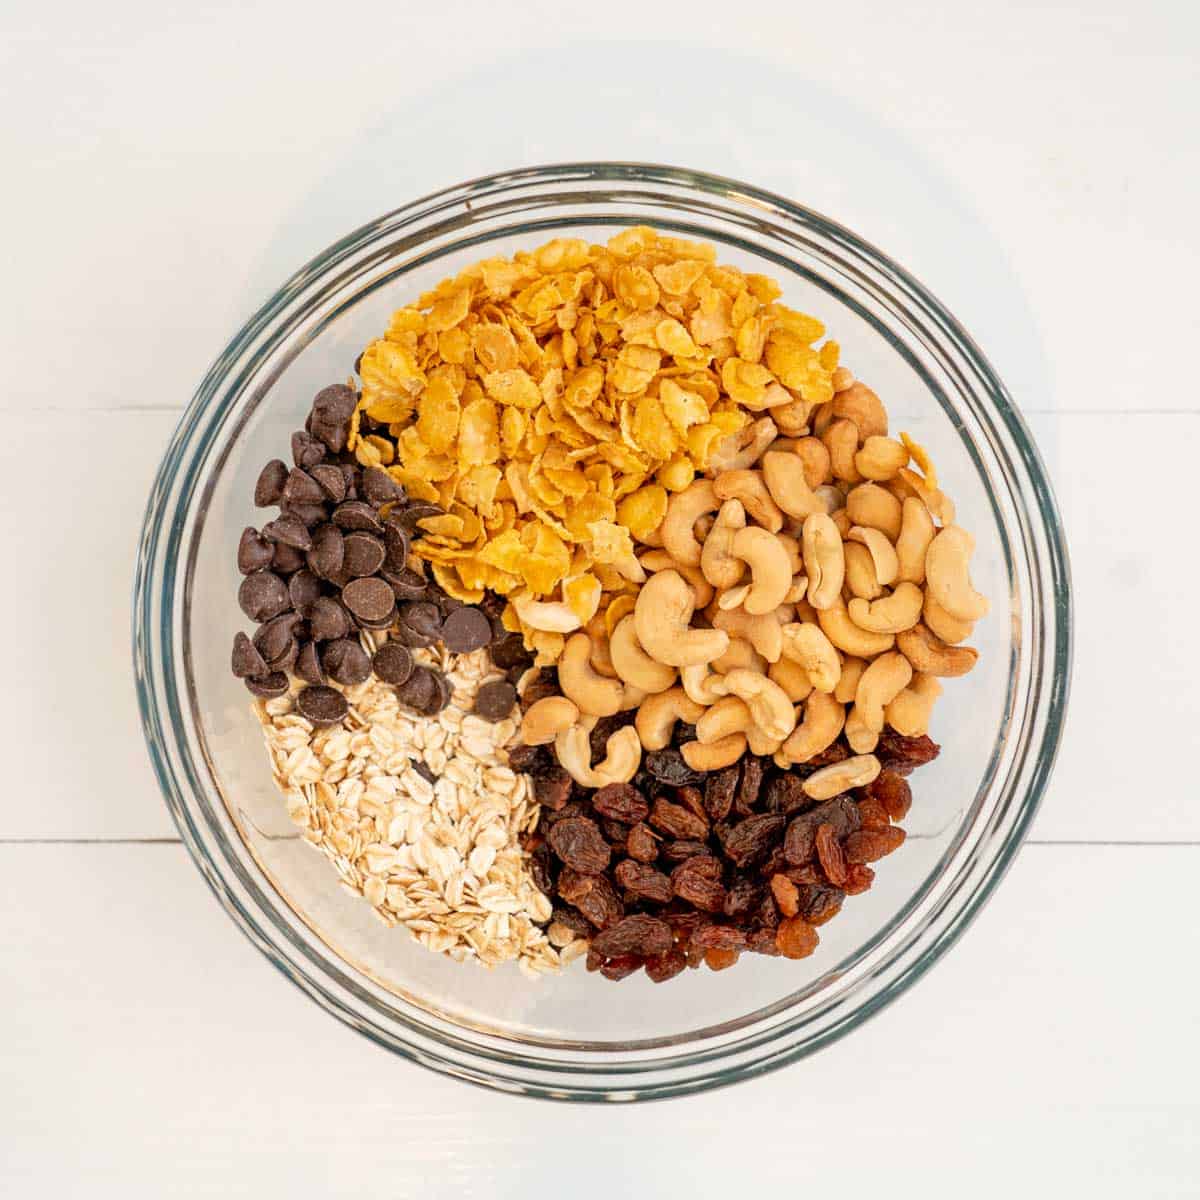 5 cups of ingredients in a bowl: Cornflakes, Cashews, Oats, Raisins, Choc Chips